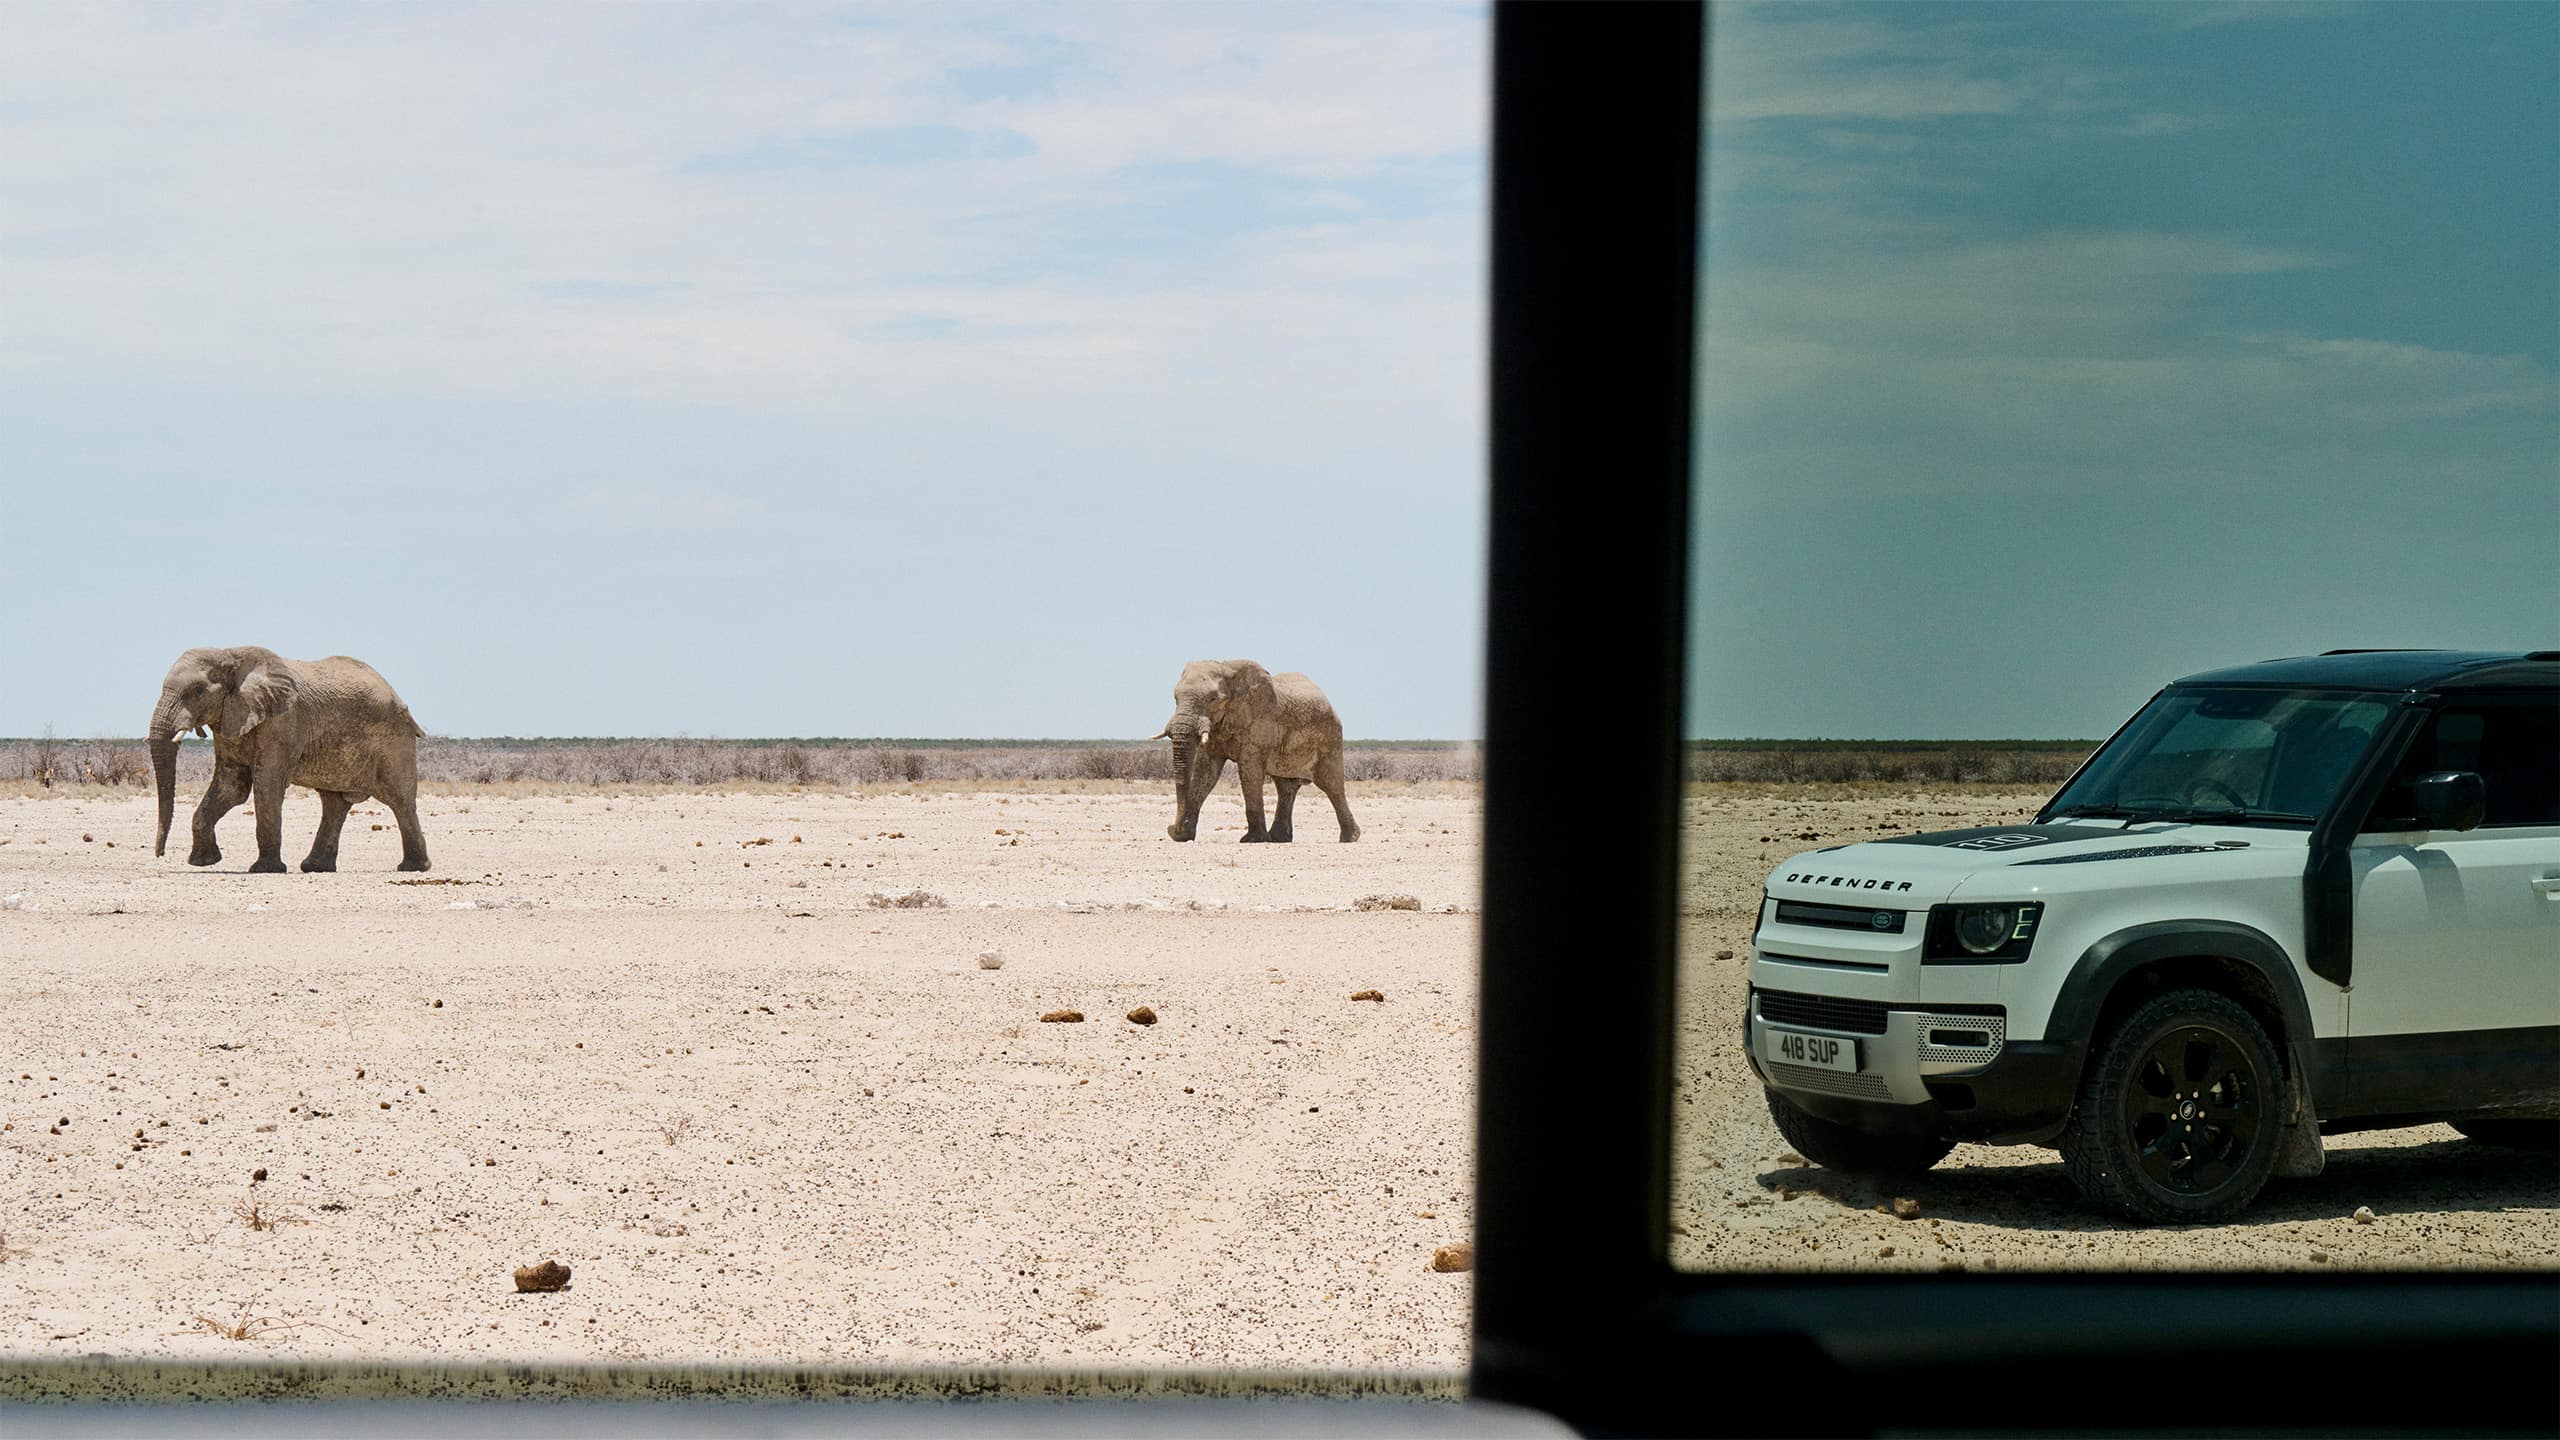 Two Elephants and Defender Car